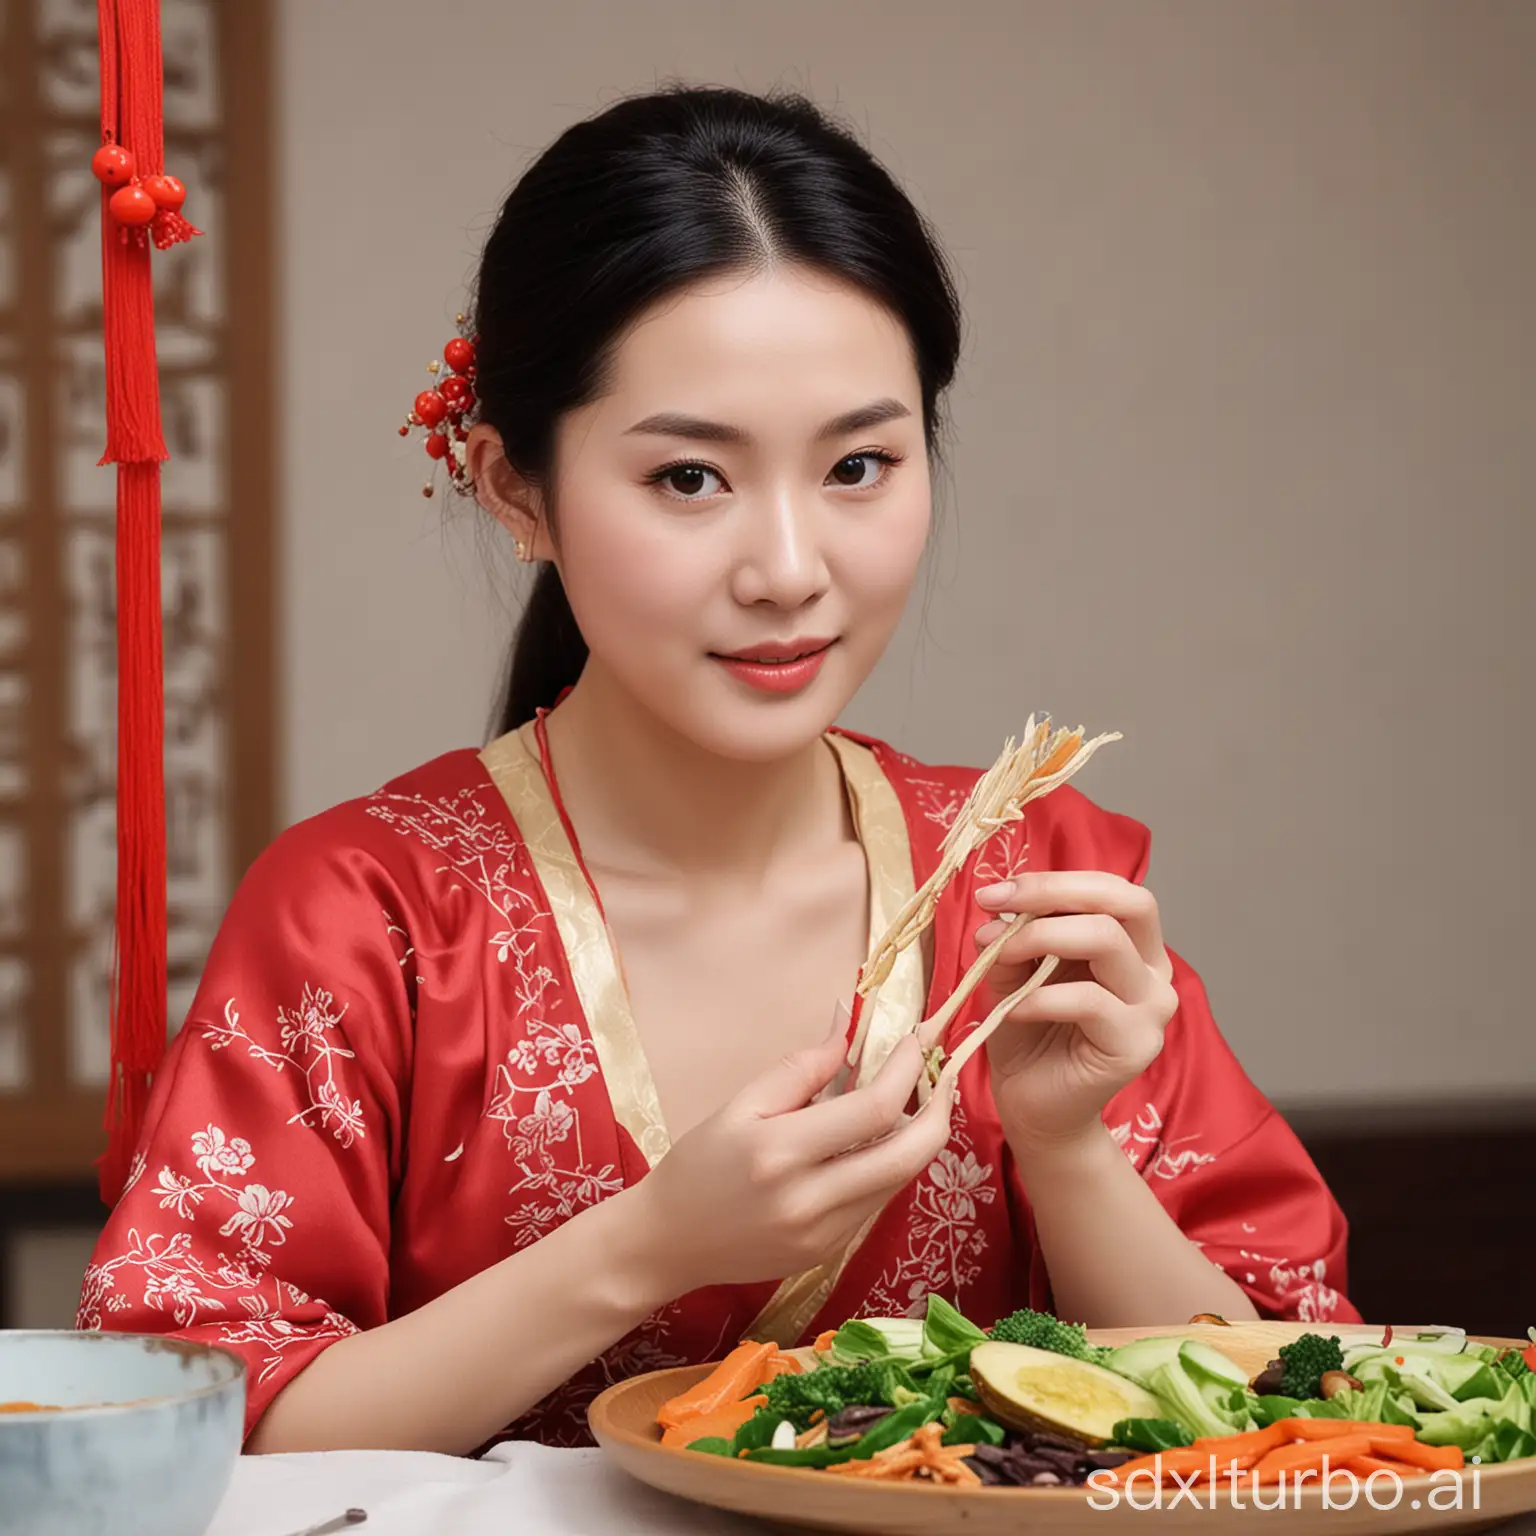 Chinese-Women-Embracing-Healthy-Diet-and-Beauty